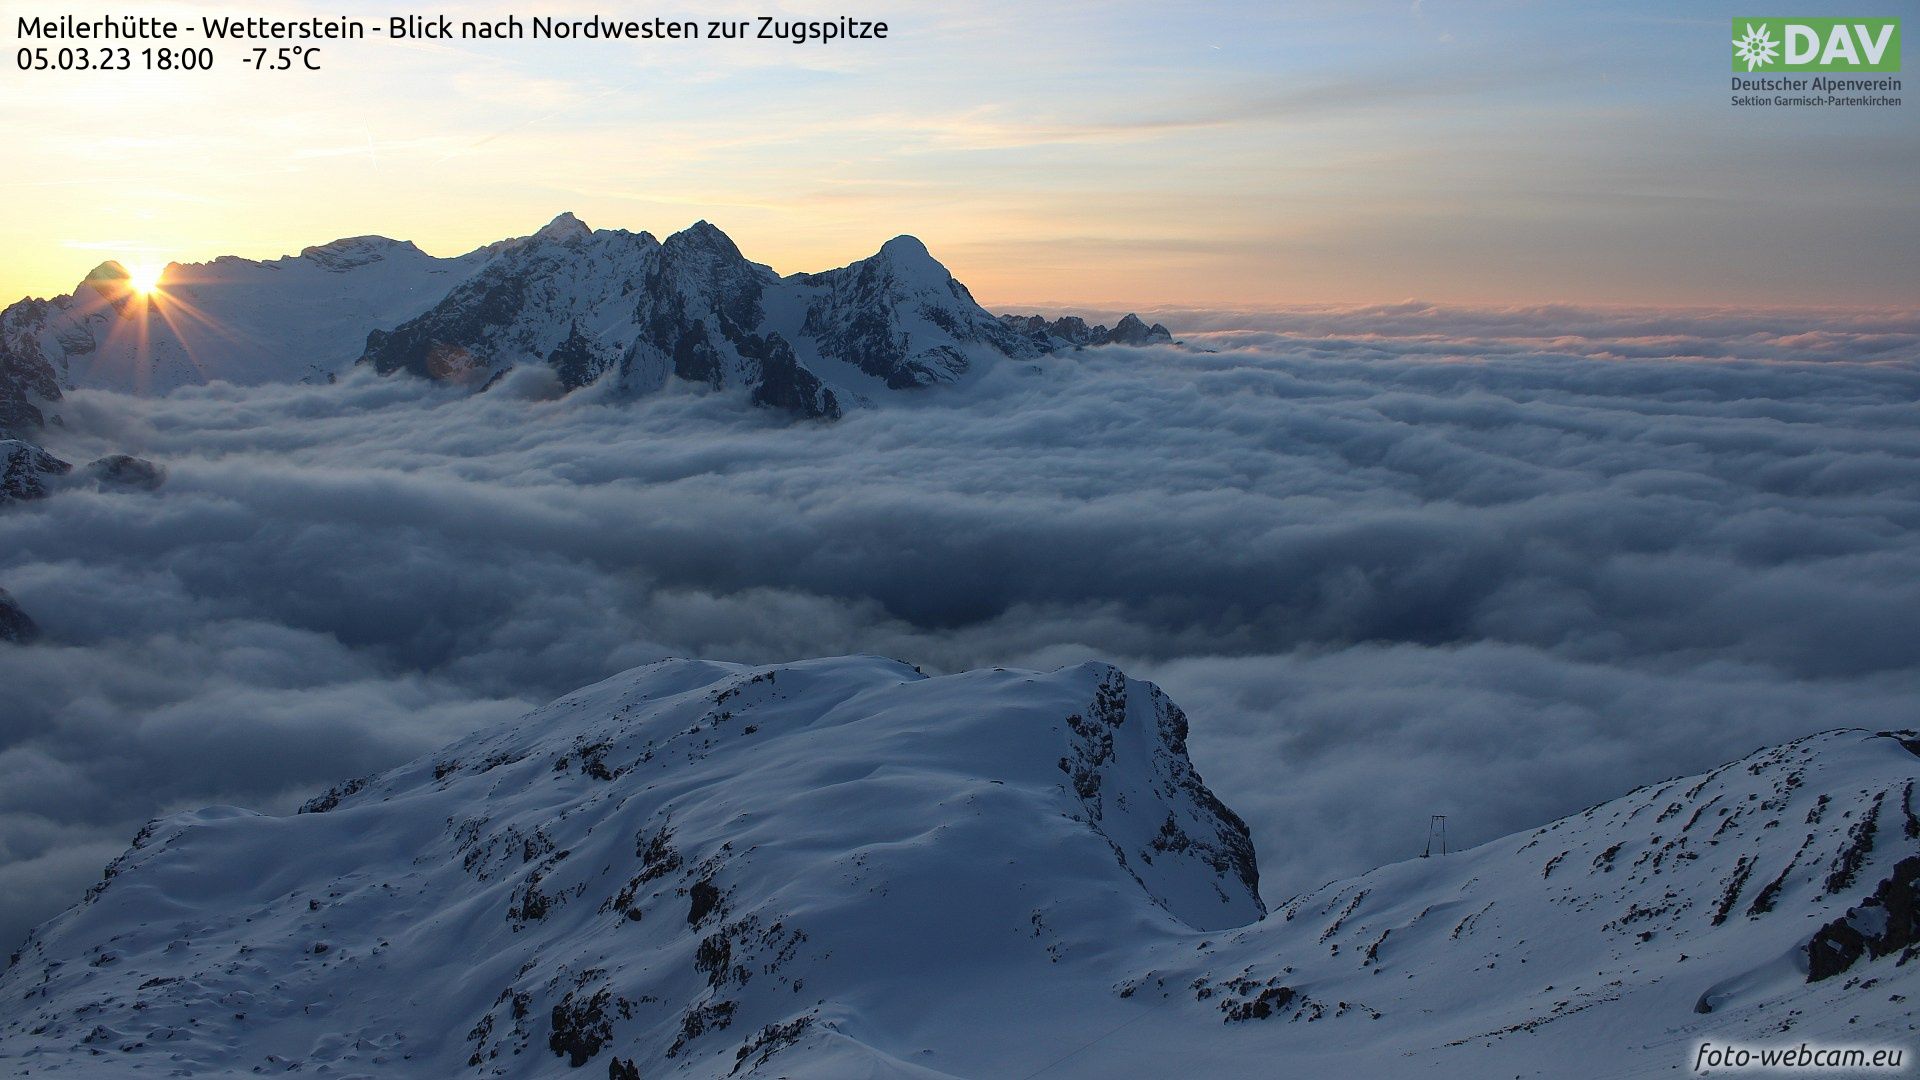 Sunset at the Meilerhütte above the low-hanging clouds on the northern side (foto-webcam.eu)